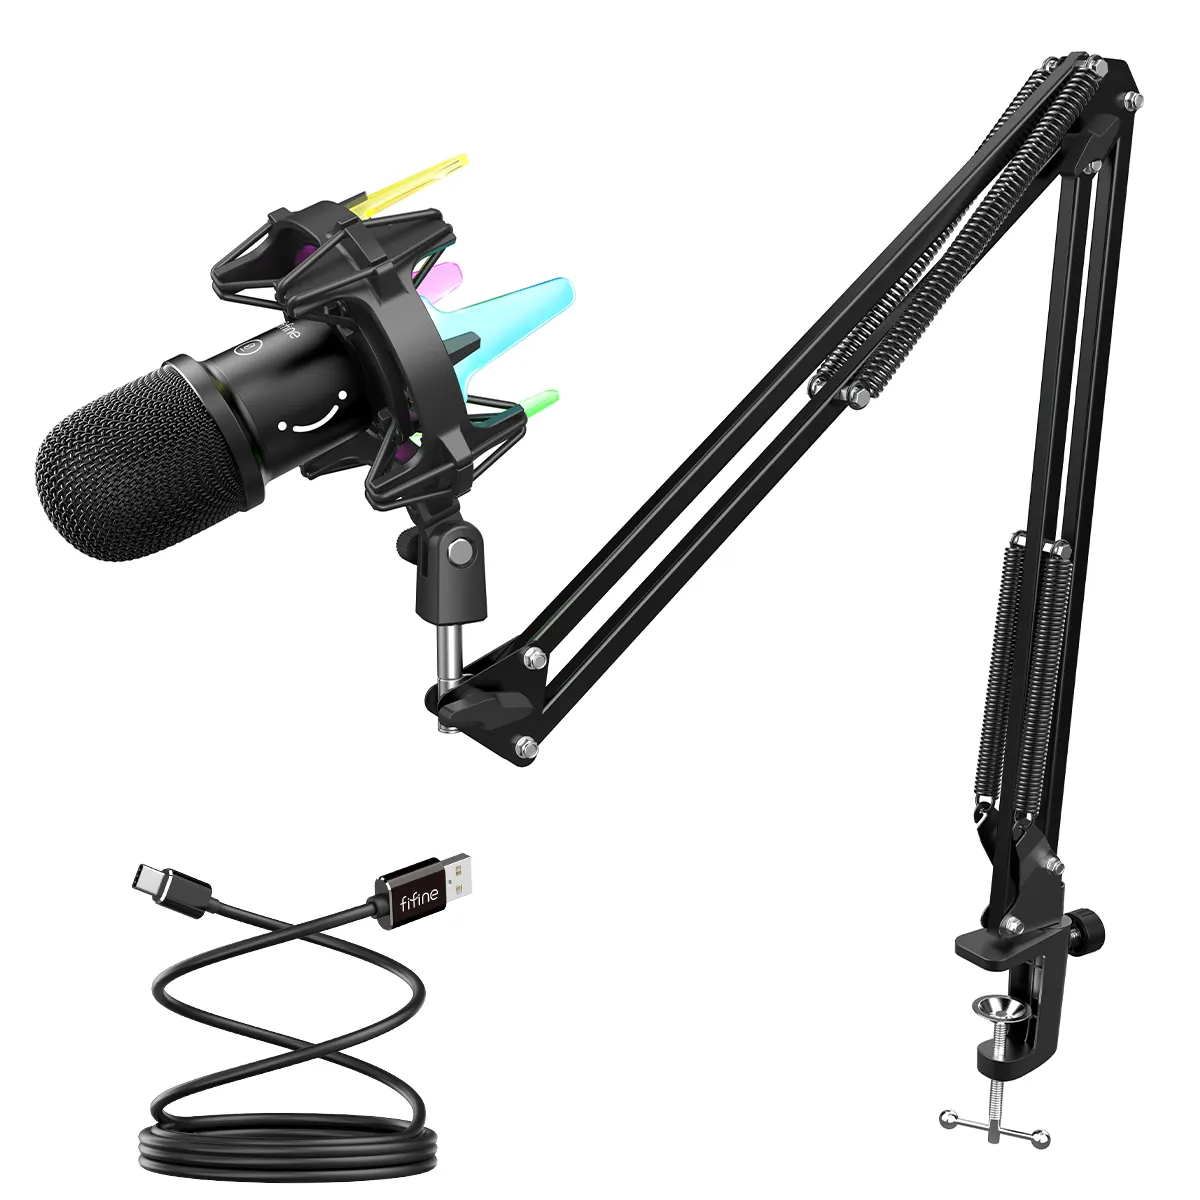 Fifine K651 shock mount arm stand live stream dynamic usb rgb gaming recording microphone